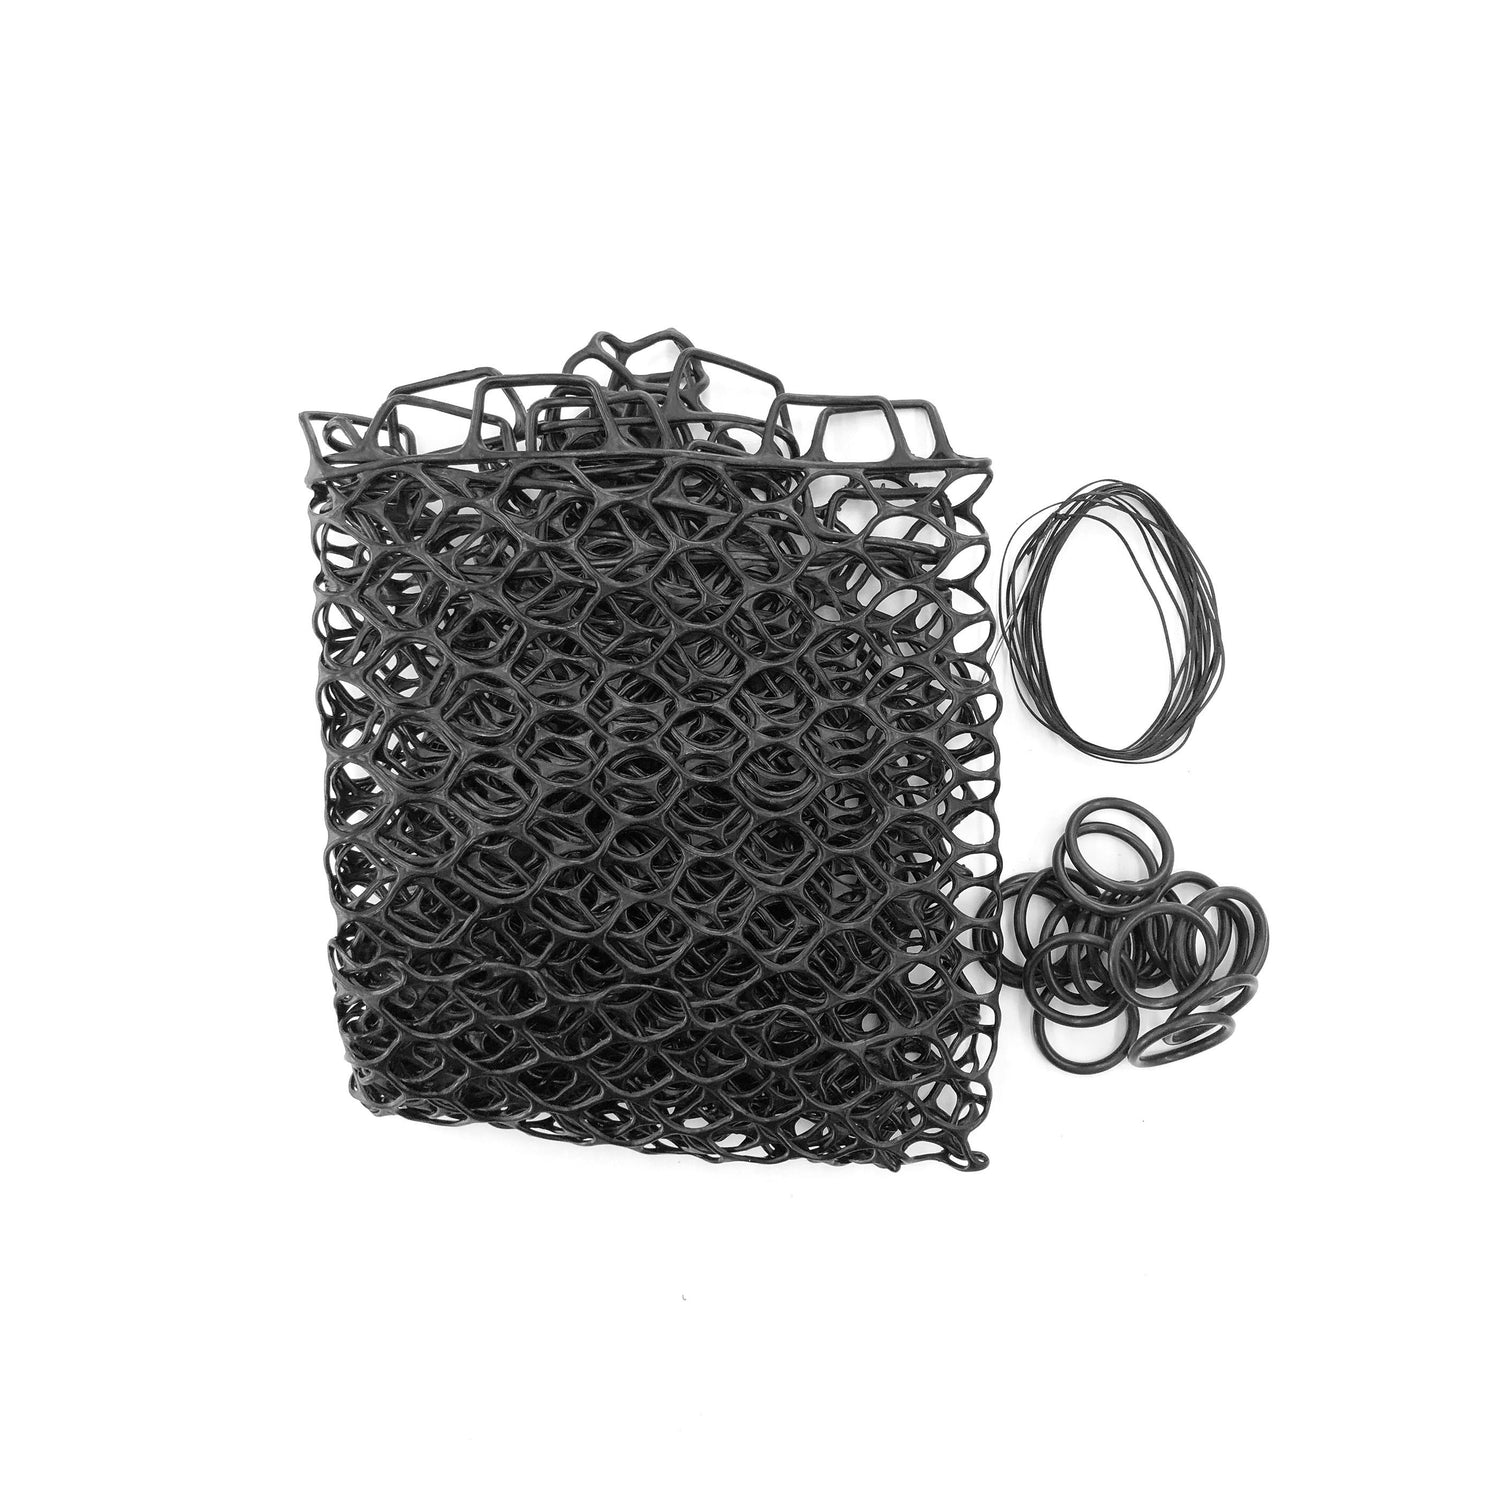 19 Nomad Replacement Rubber Net - Fly Fishing – Fishpond